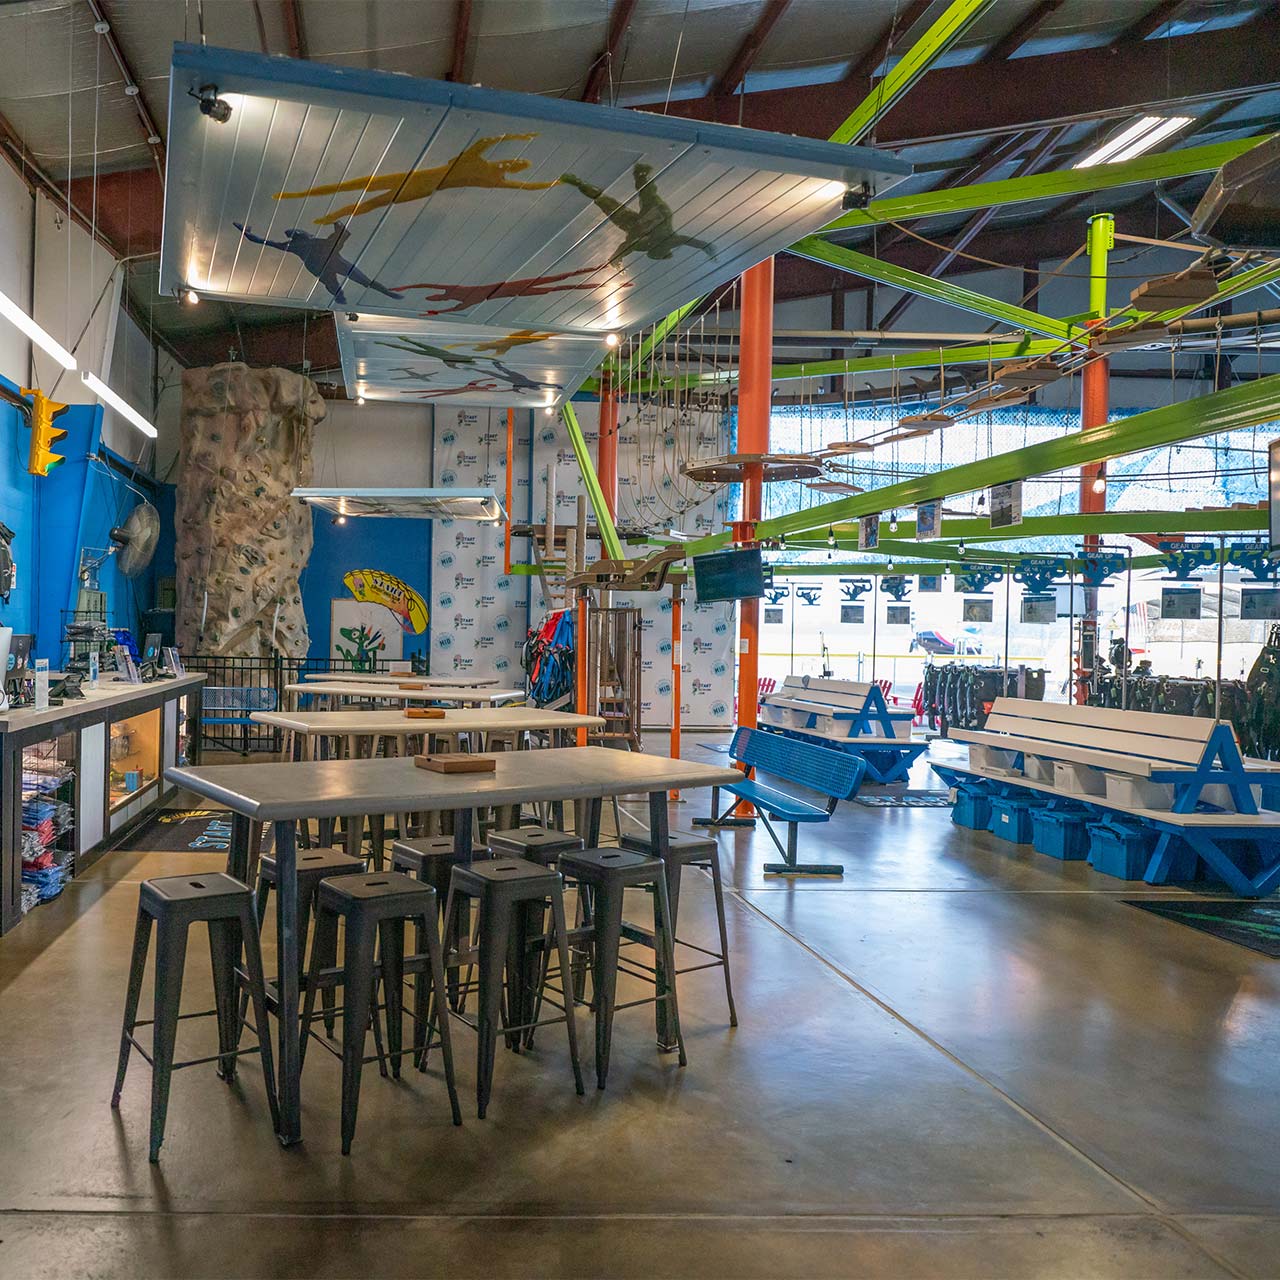 Inside Start Skydiving depicts a climbing wall, neon green ropes course, and tall tables for sitting.